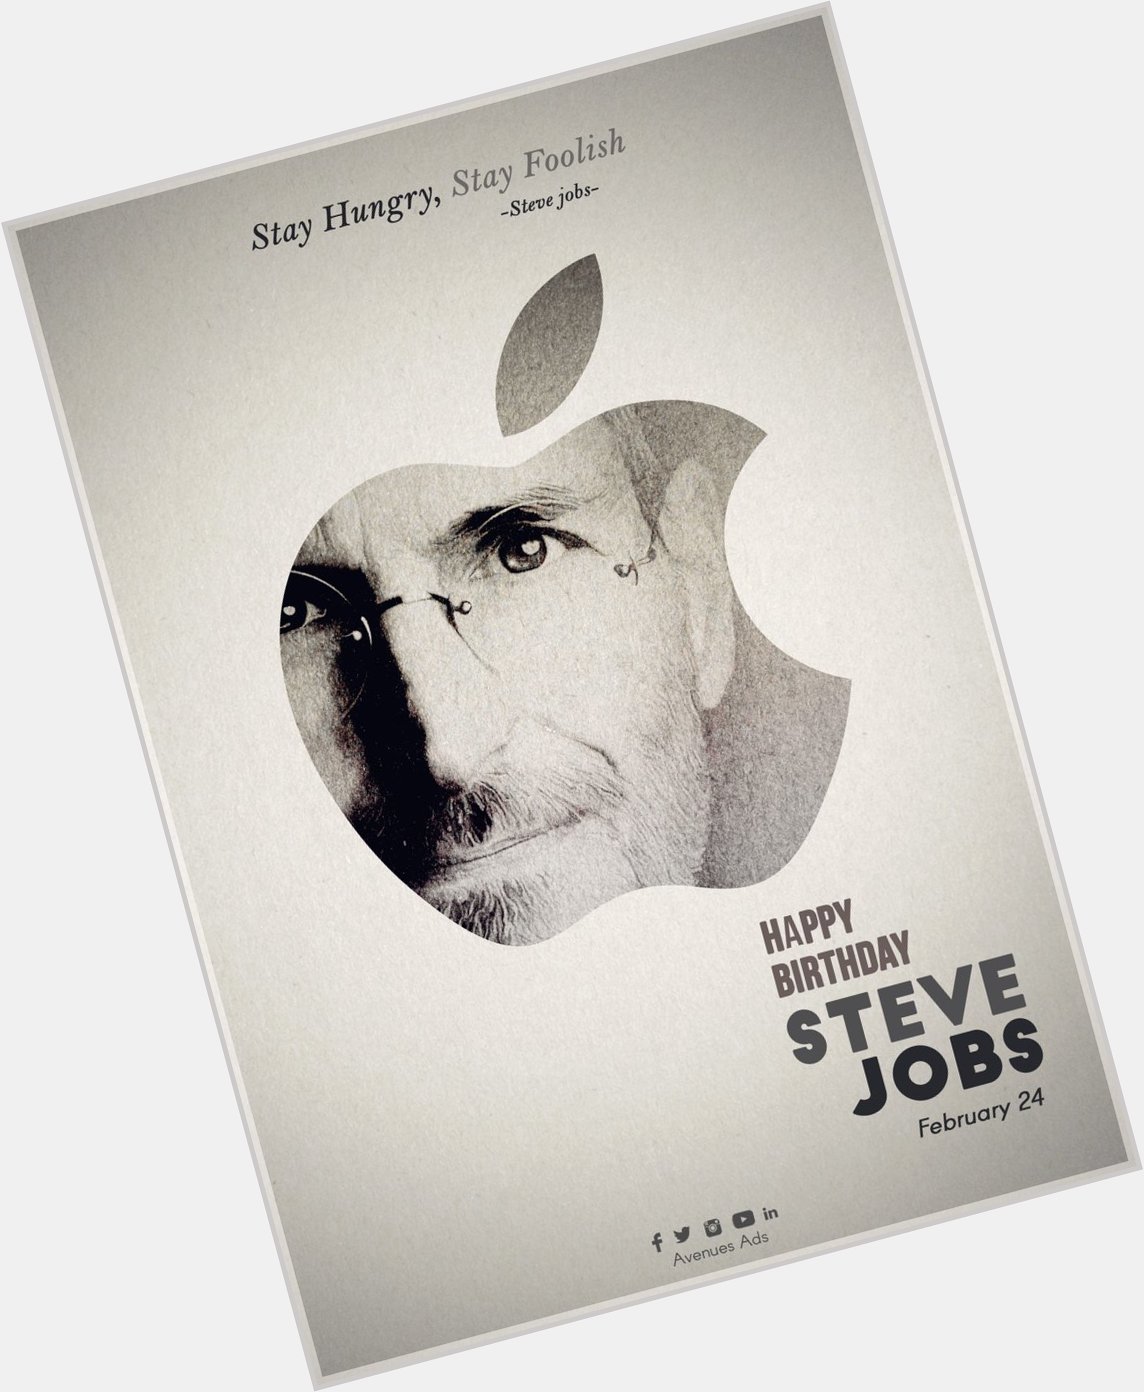 Happy Birthday to Steve Jobs, who would have turned 62 today!     